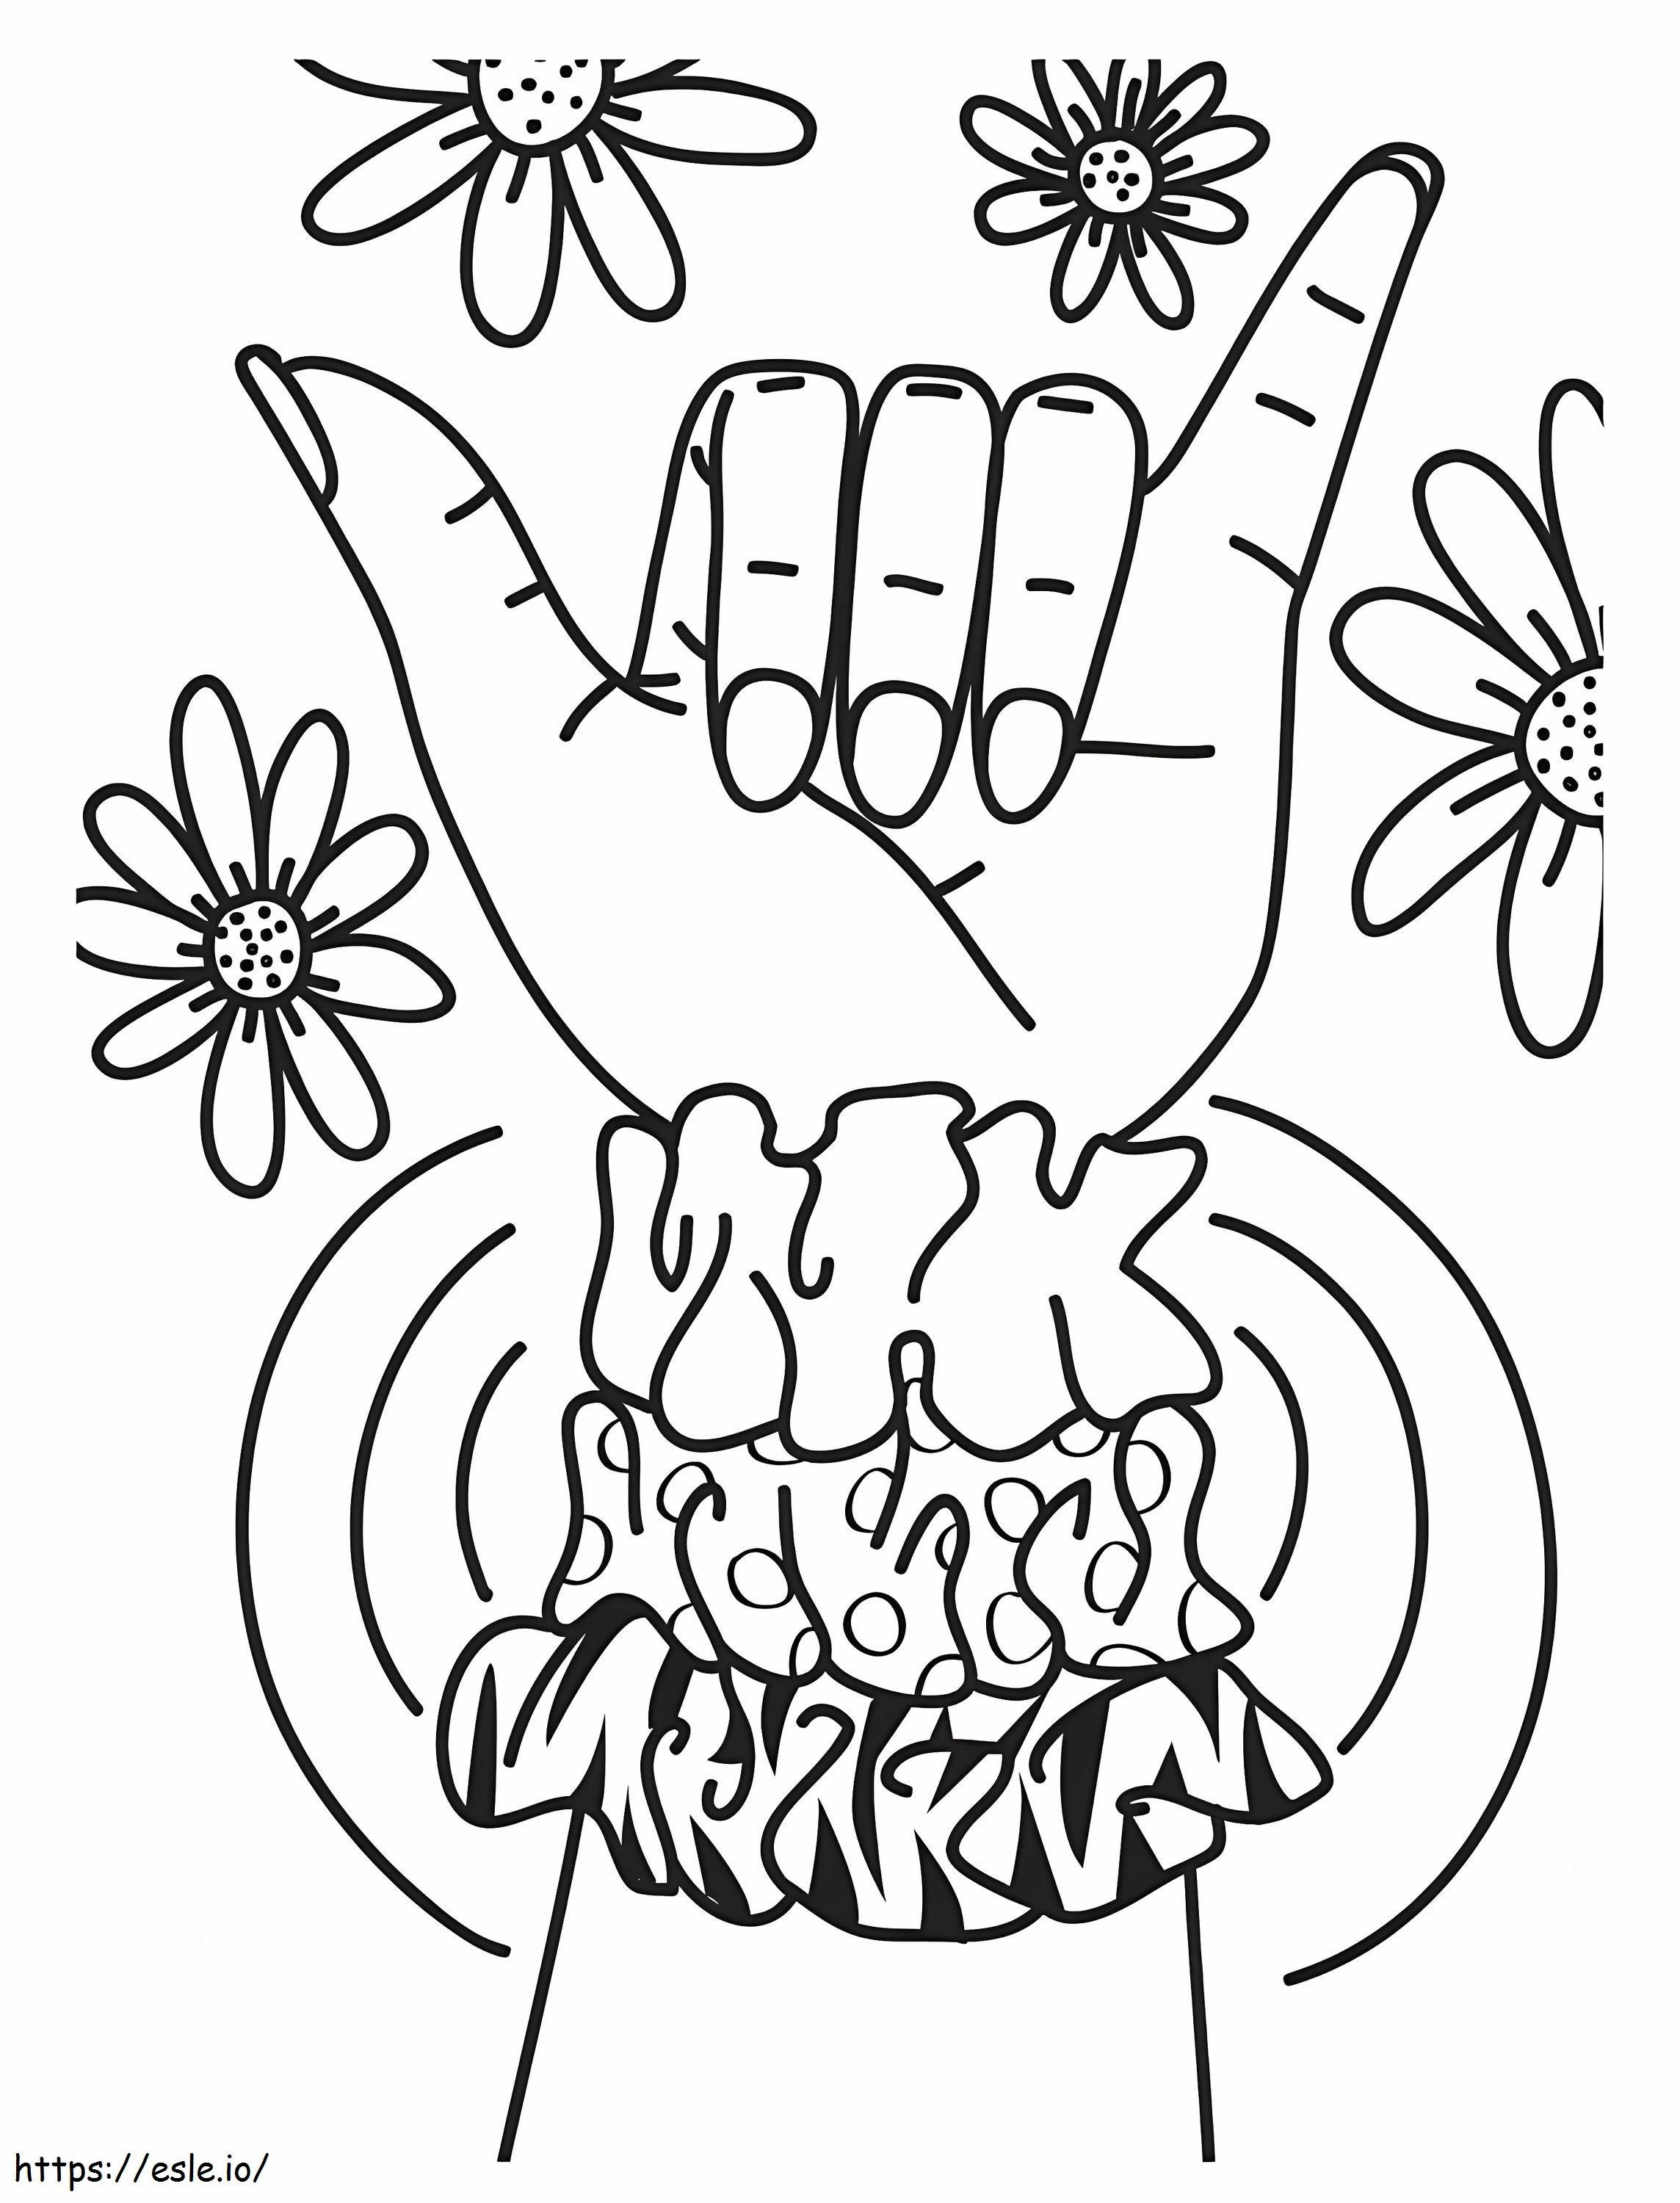 Power Flowers VSCO Girl coloring page